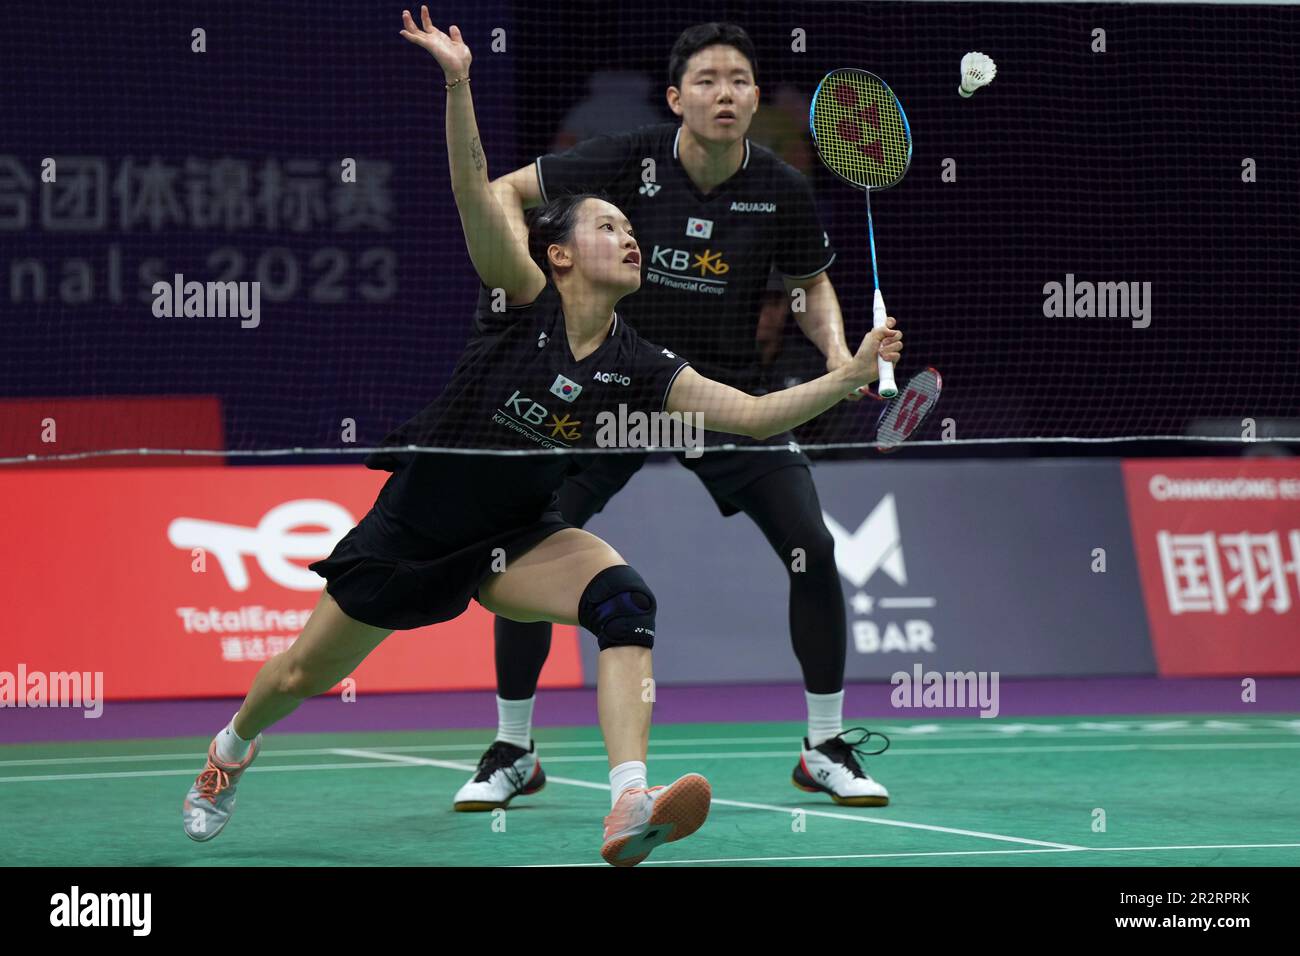 Chae Yu Jung of South Korea returns a shot with teammate Seo Seung Jae during their mixed doubles badminton final match against Zheng Siwei and Huang Yaqiong of China at the BWF